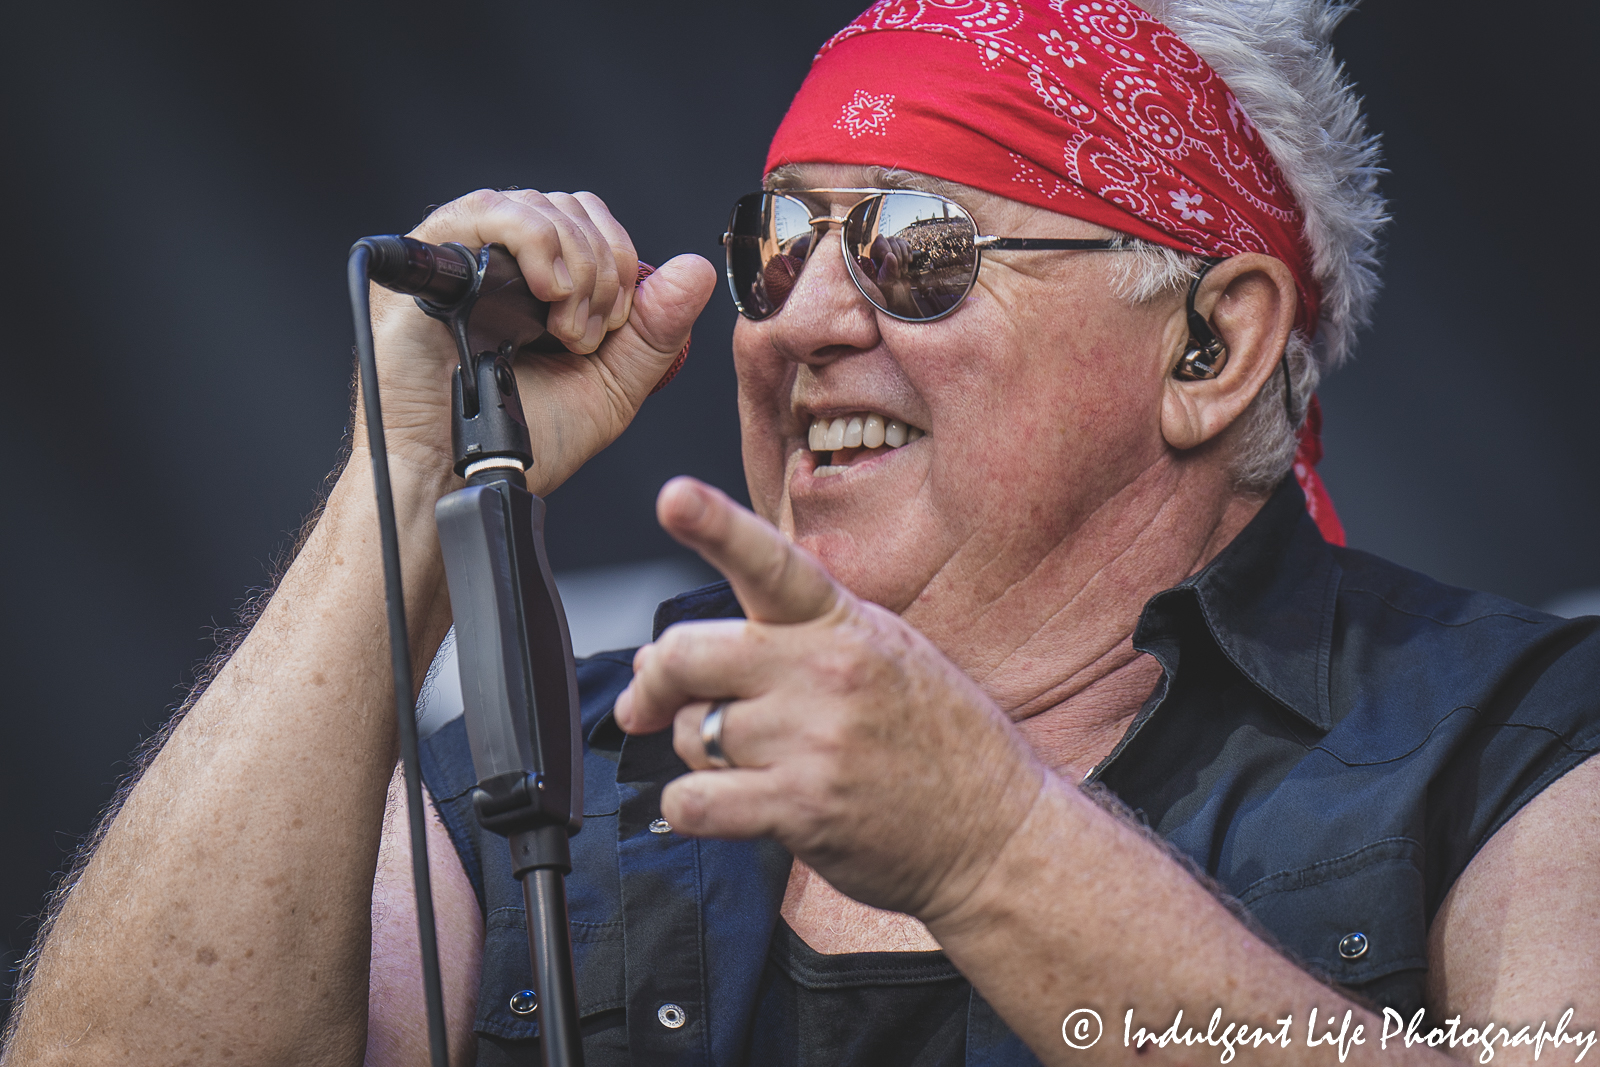 Lead singer Mike Reno of Loverboy performing live at Starlight Theatre in Kansas City, MO on June 14, 2022.